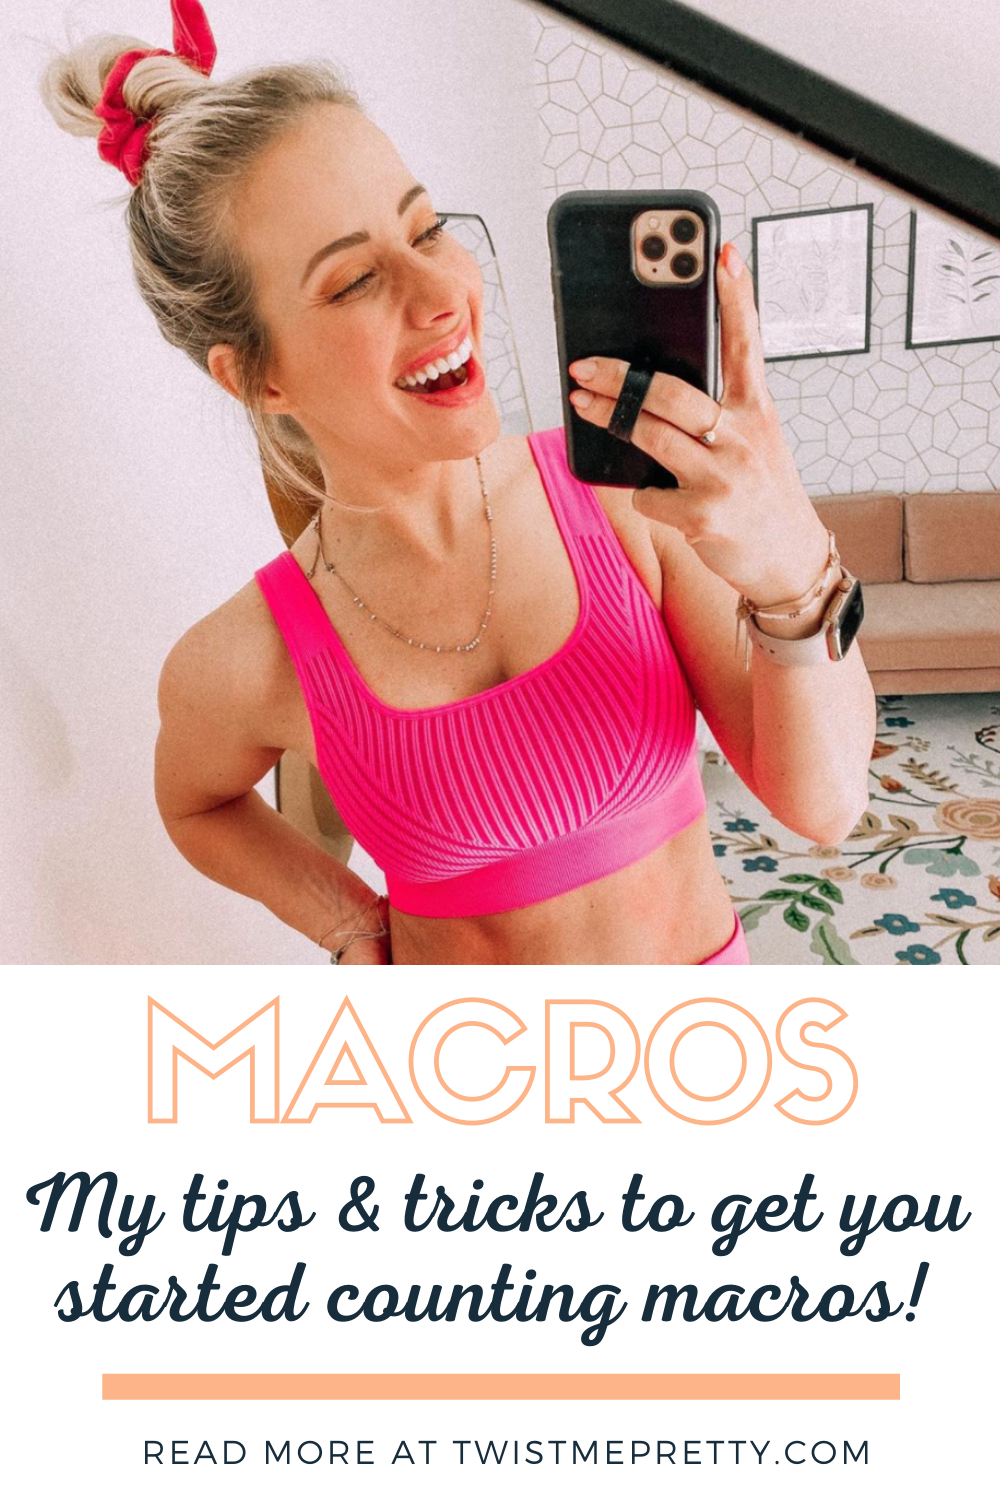 Macros- My tips and tricks to get you started counting macros! www.twistmepretty.com